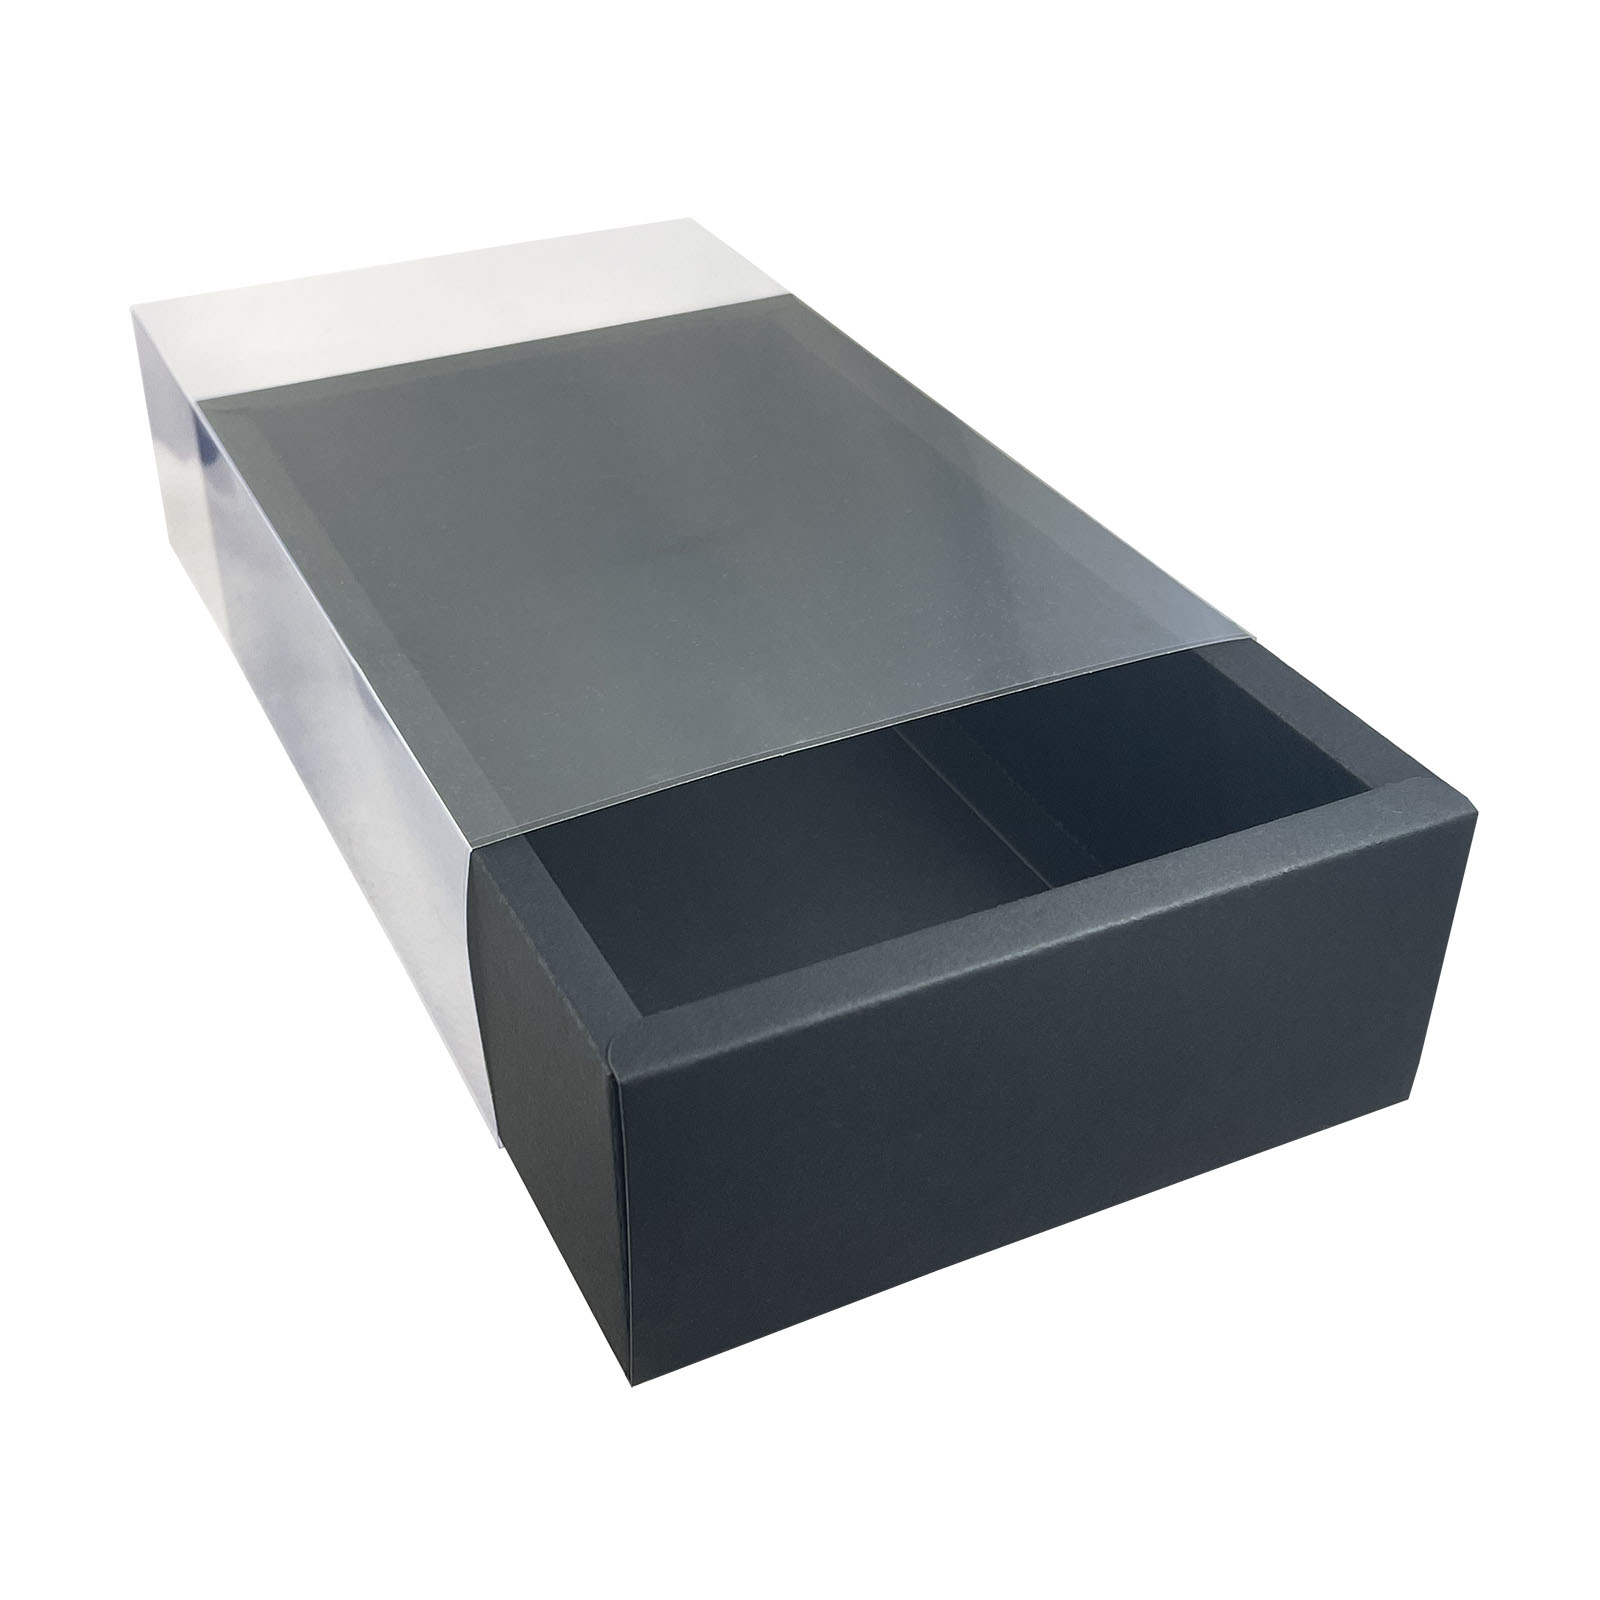 Black folding paper drawer box with transparent cover